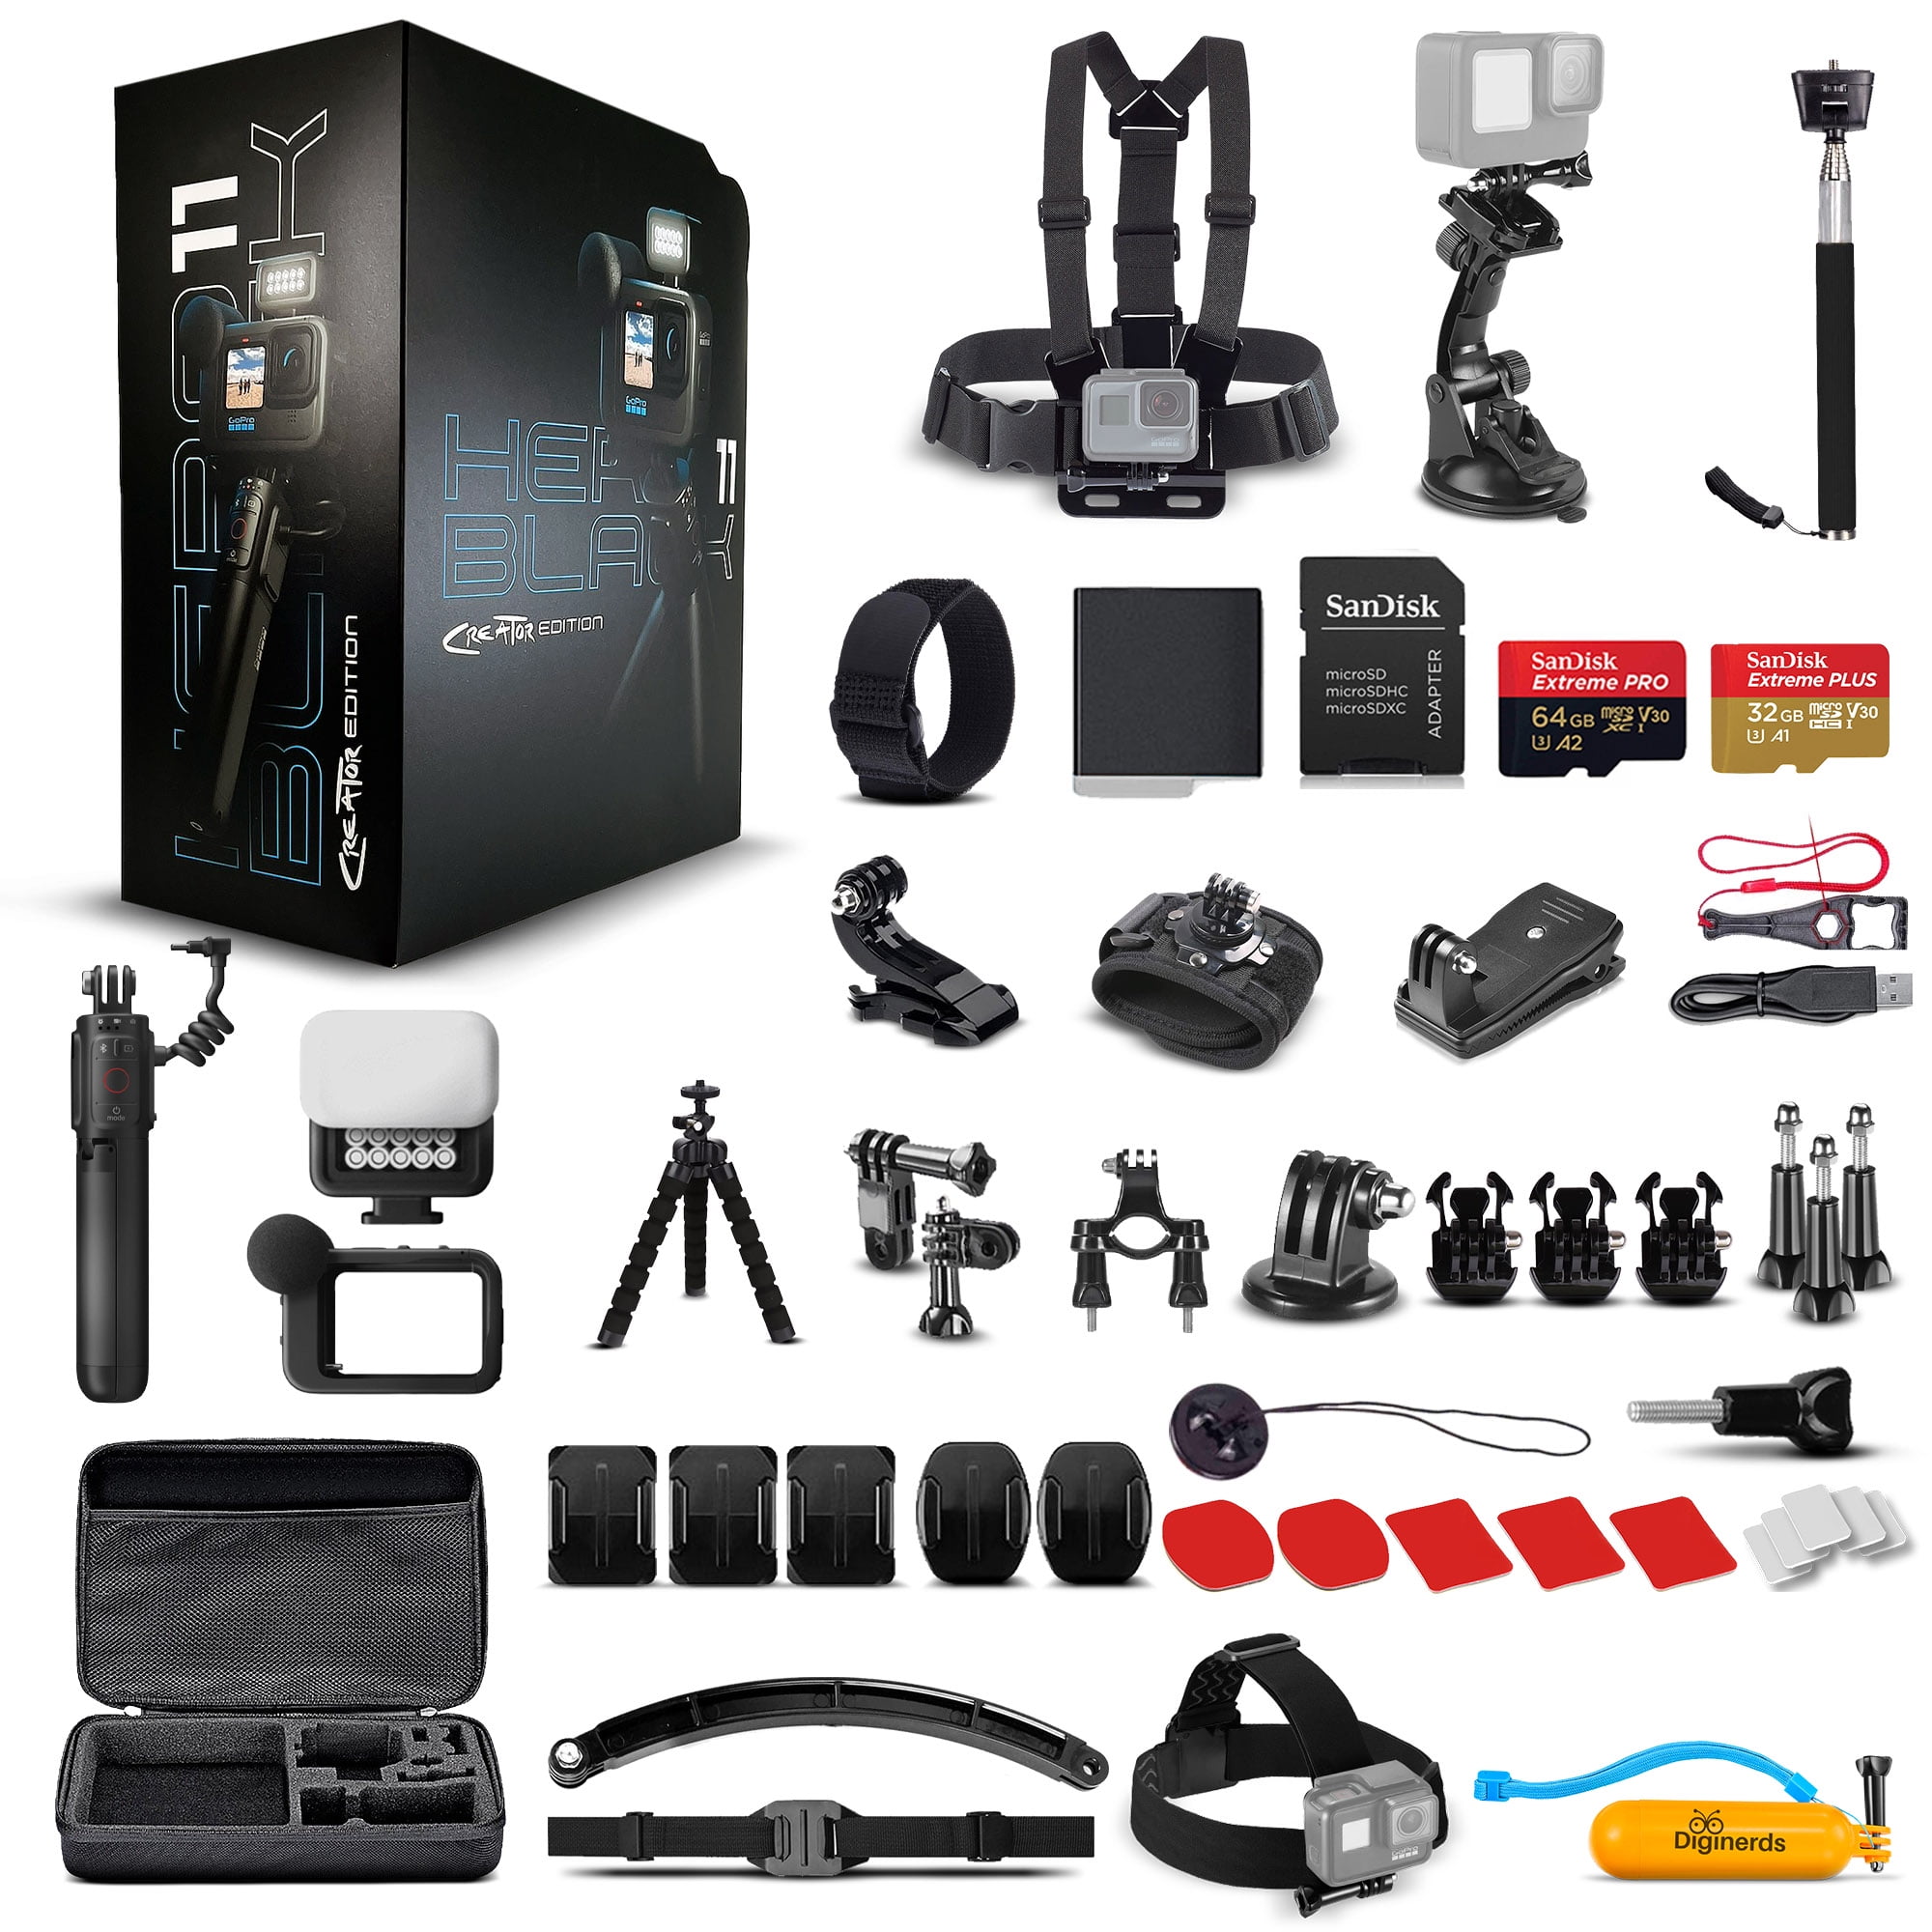 Media Volta and Grip, Creator - Mod, Piece GoPro (Battery Edition Tripod, Remote), + Kit 50 Includes Camera HERO11 Accessory Batteries Action - 64GB 2 Card, Light Waterproof Extra (HERO Mod, 11) Black